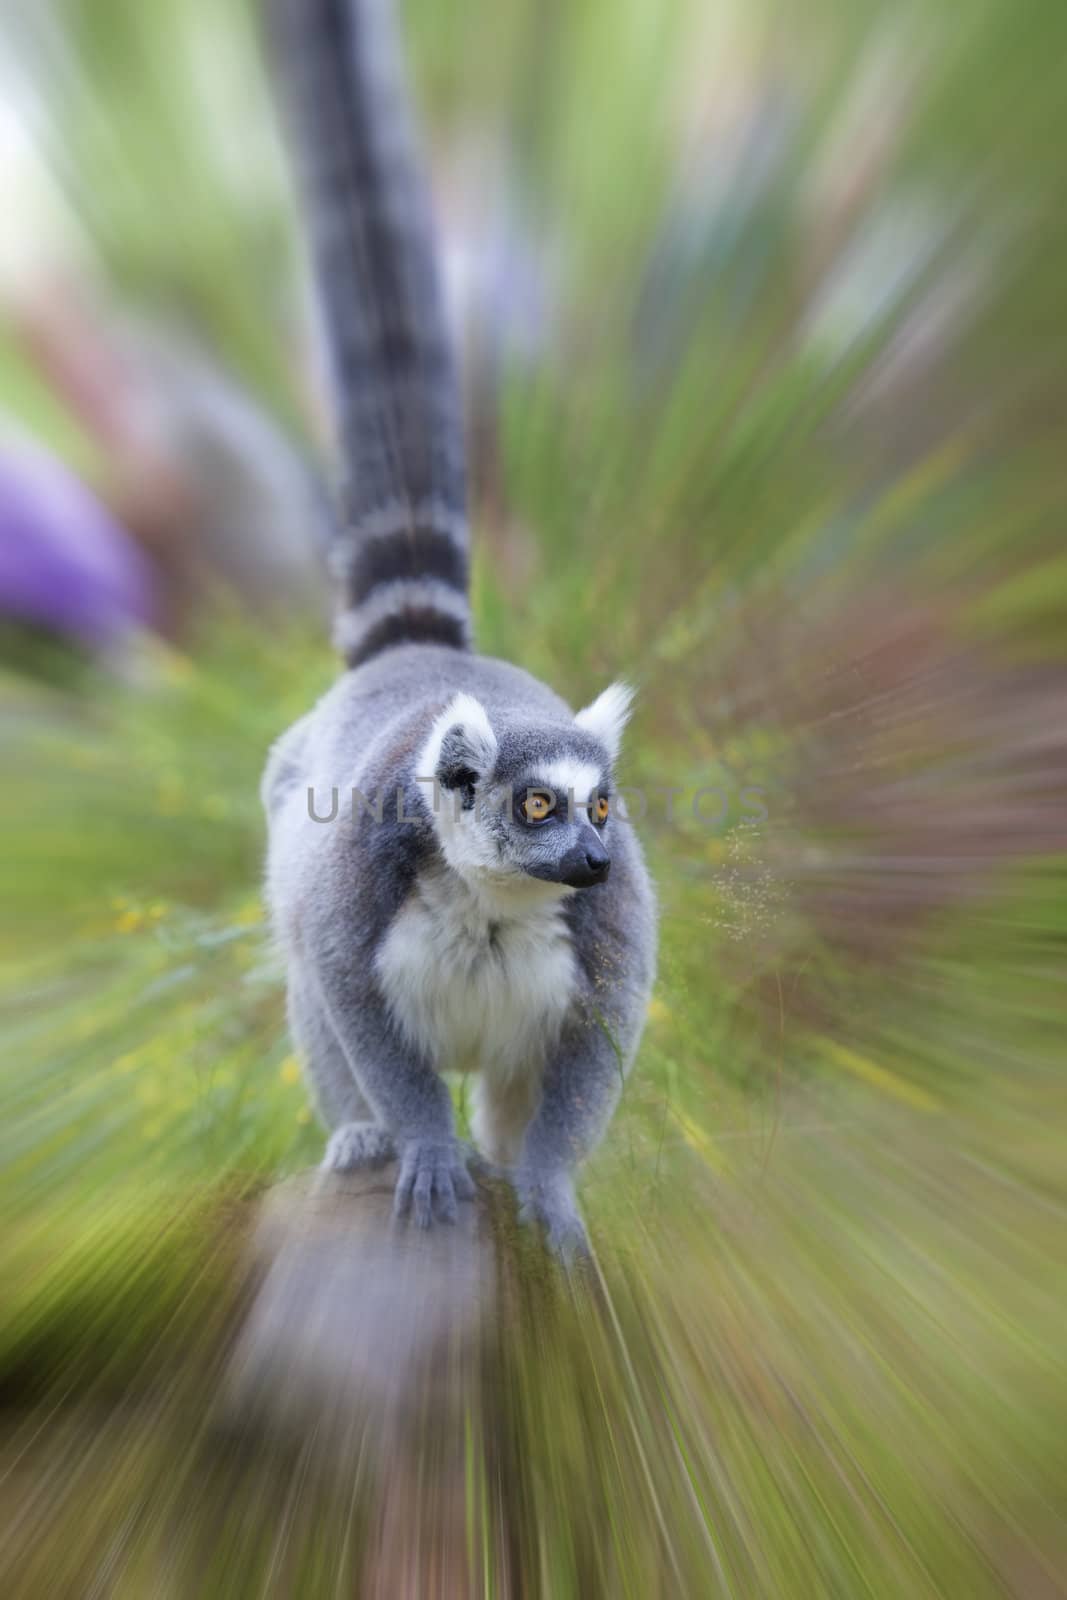 A ring-tailed lemur in a hurry